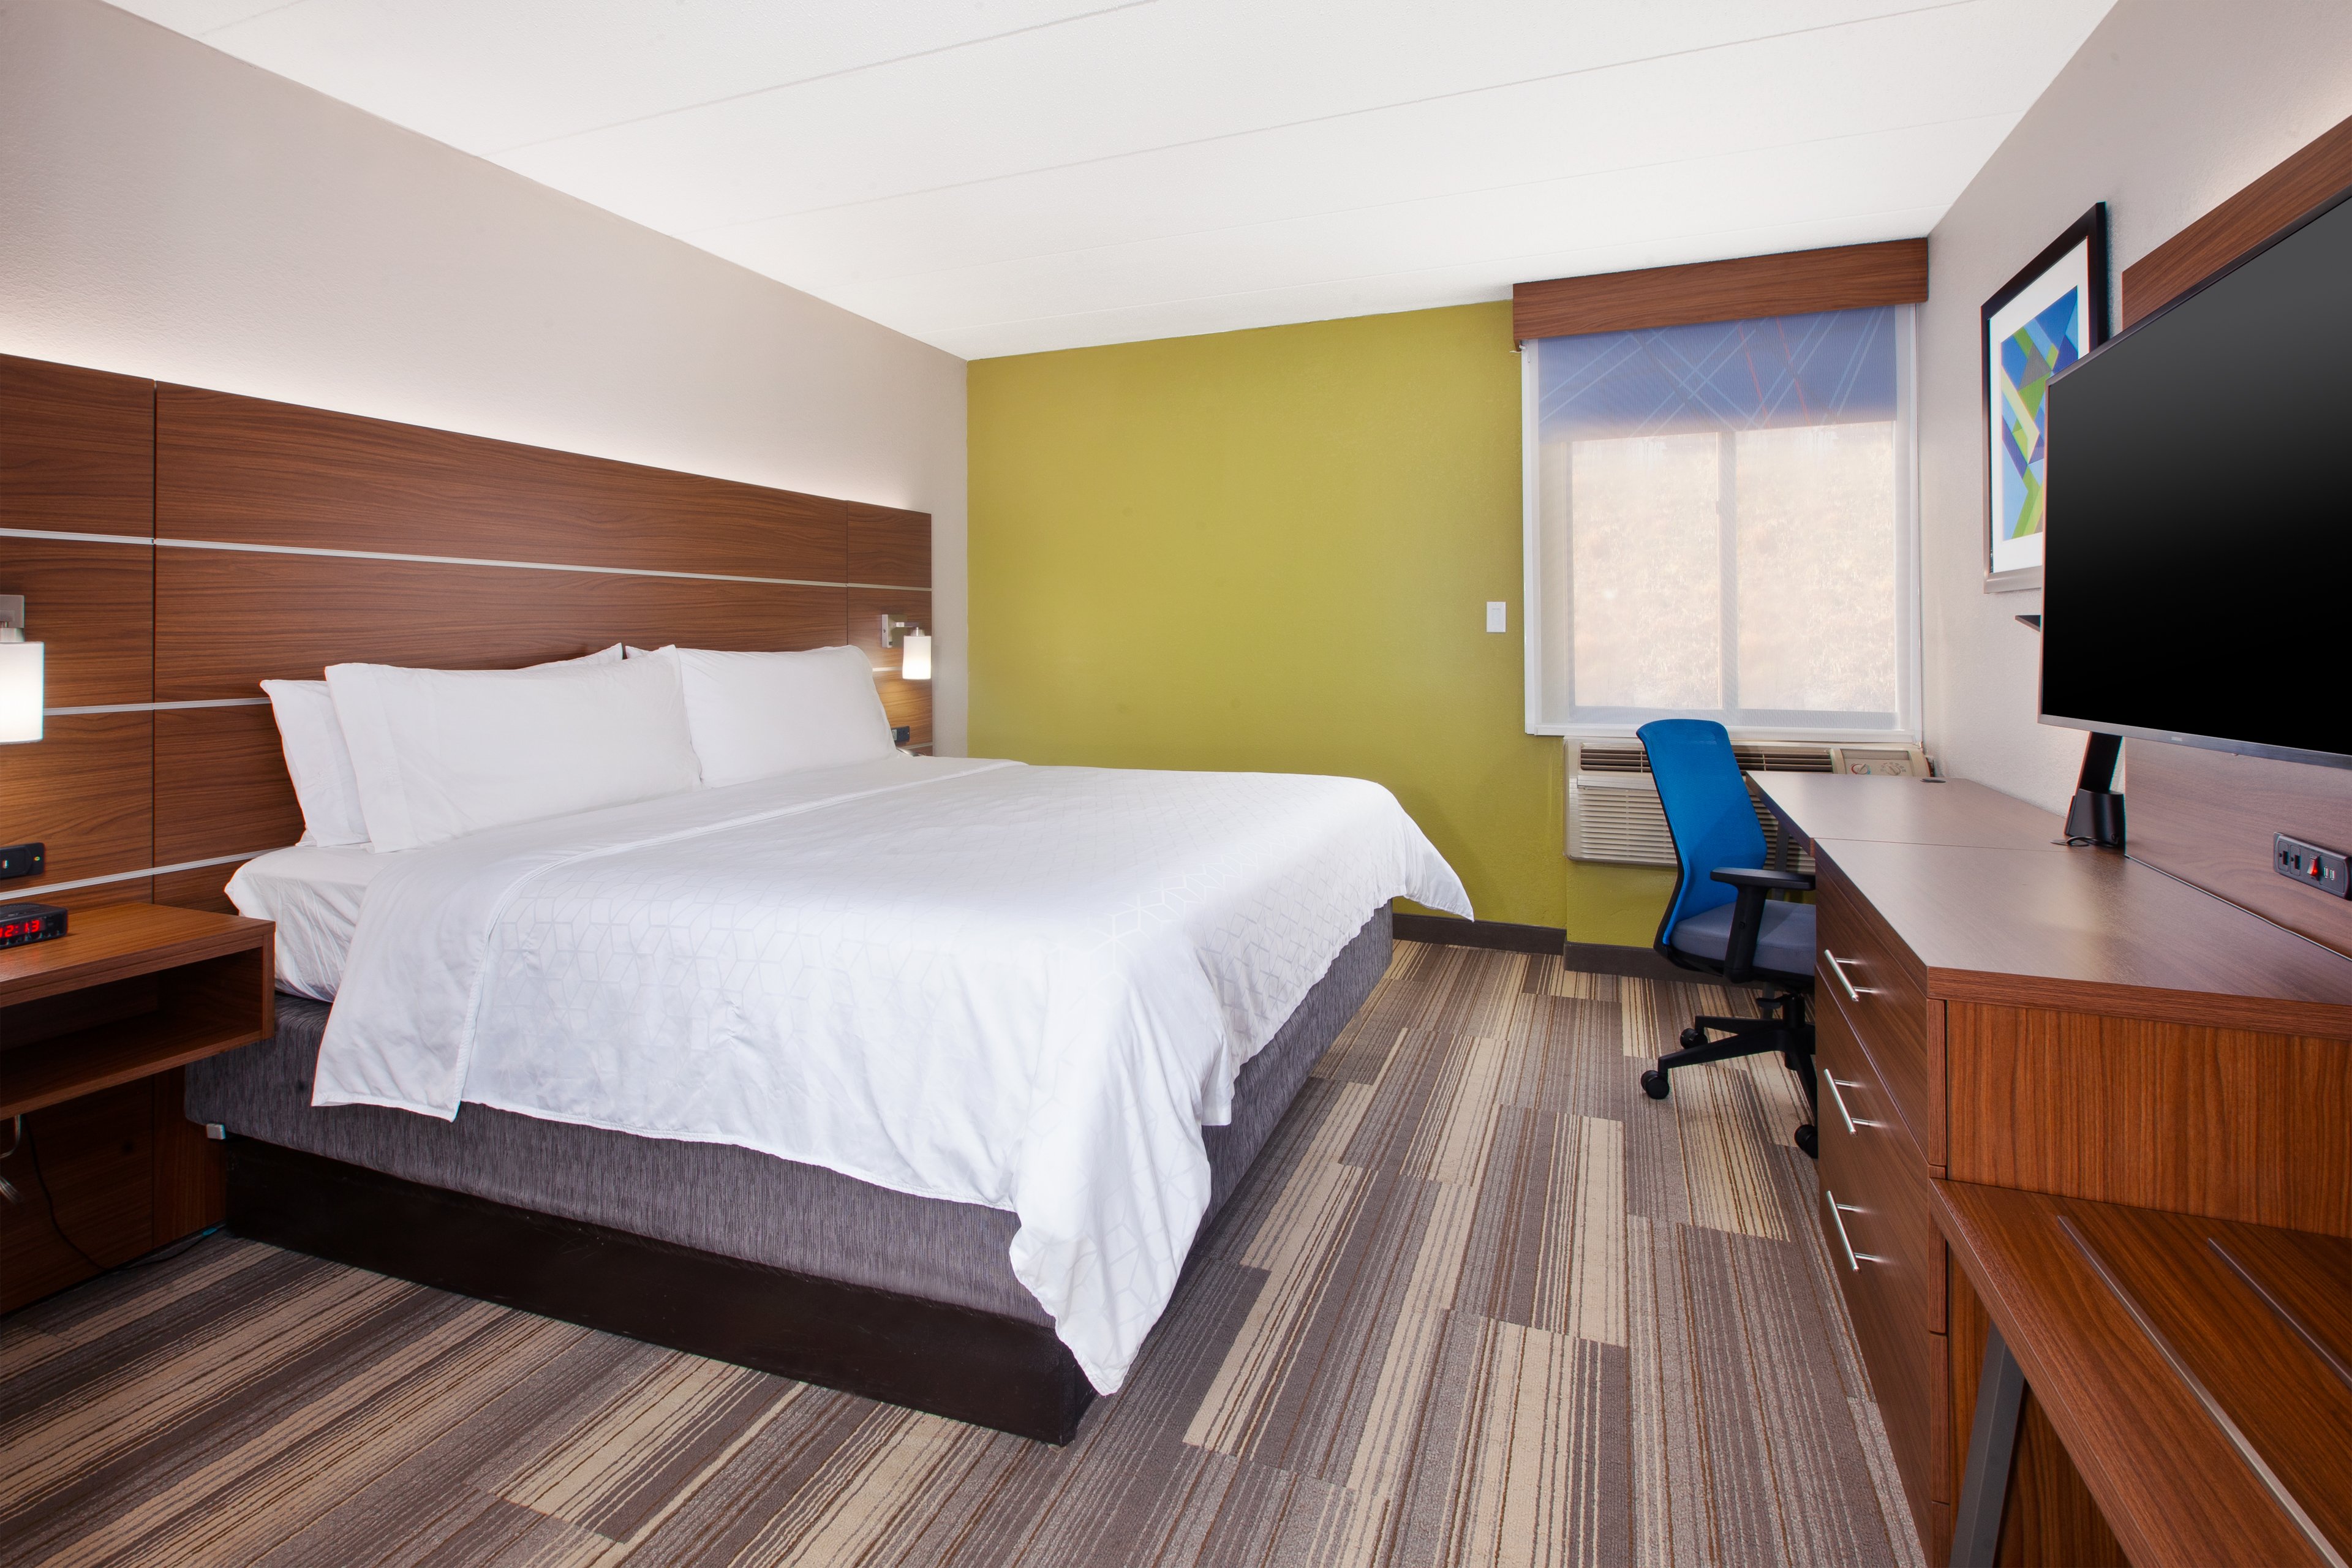 Our spacious ADA rooms feature total wheelchair accessibility 